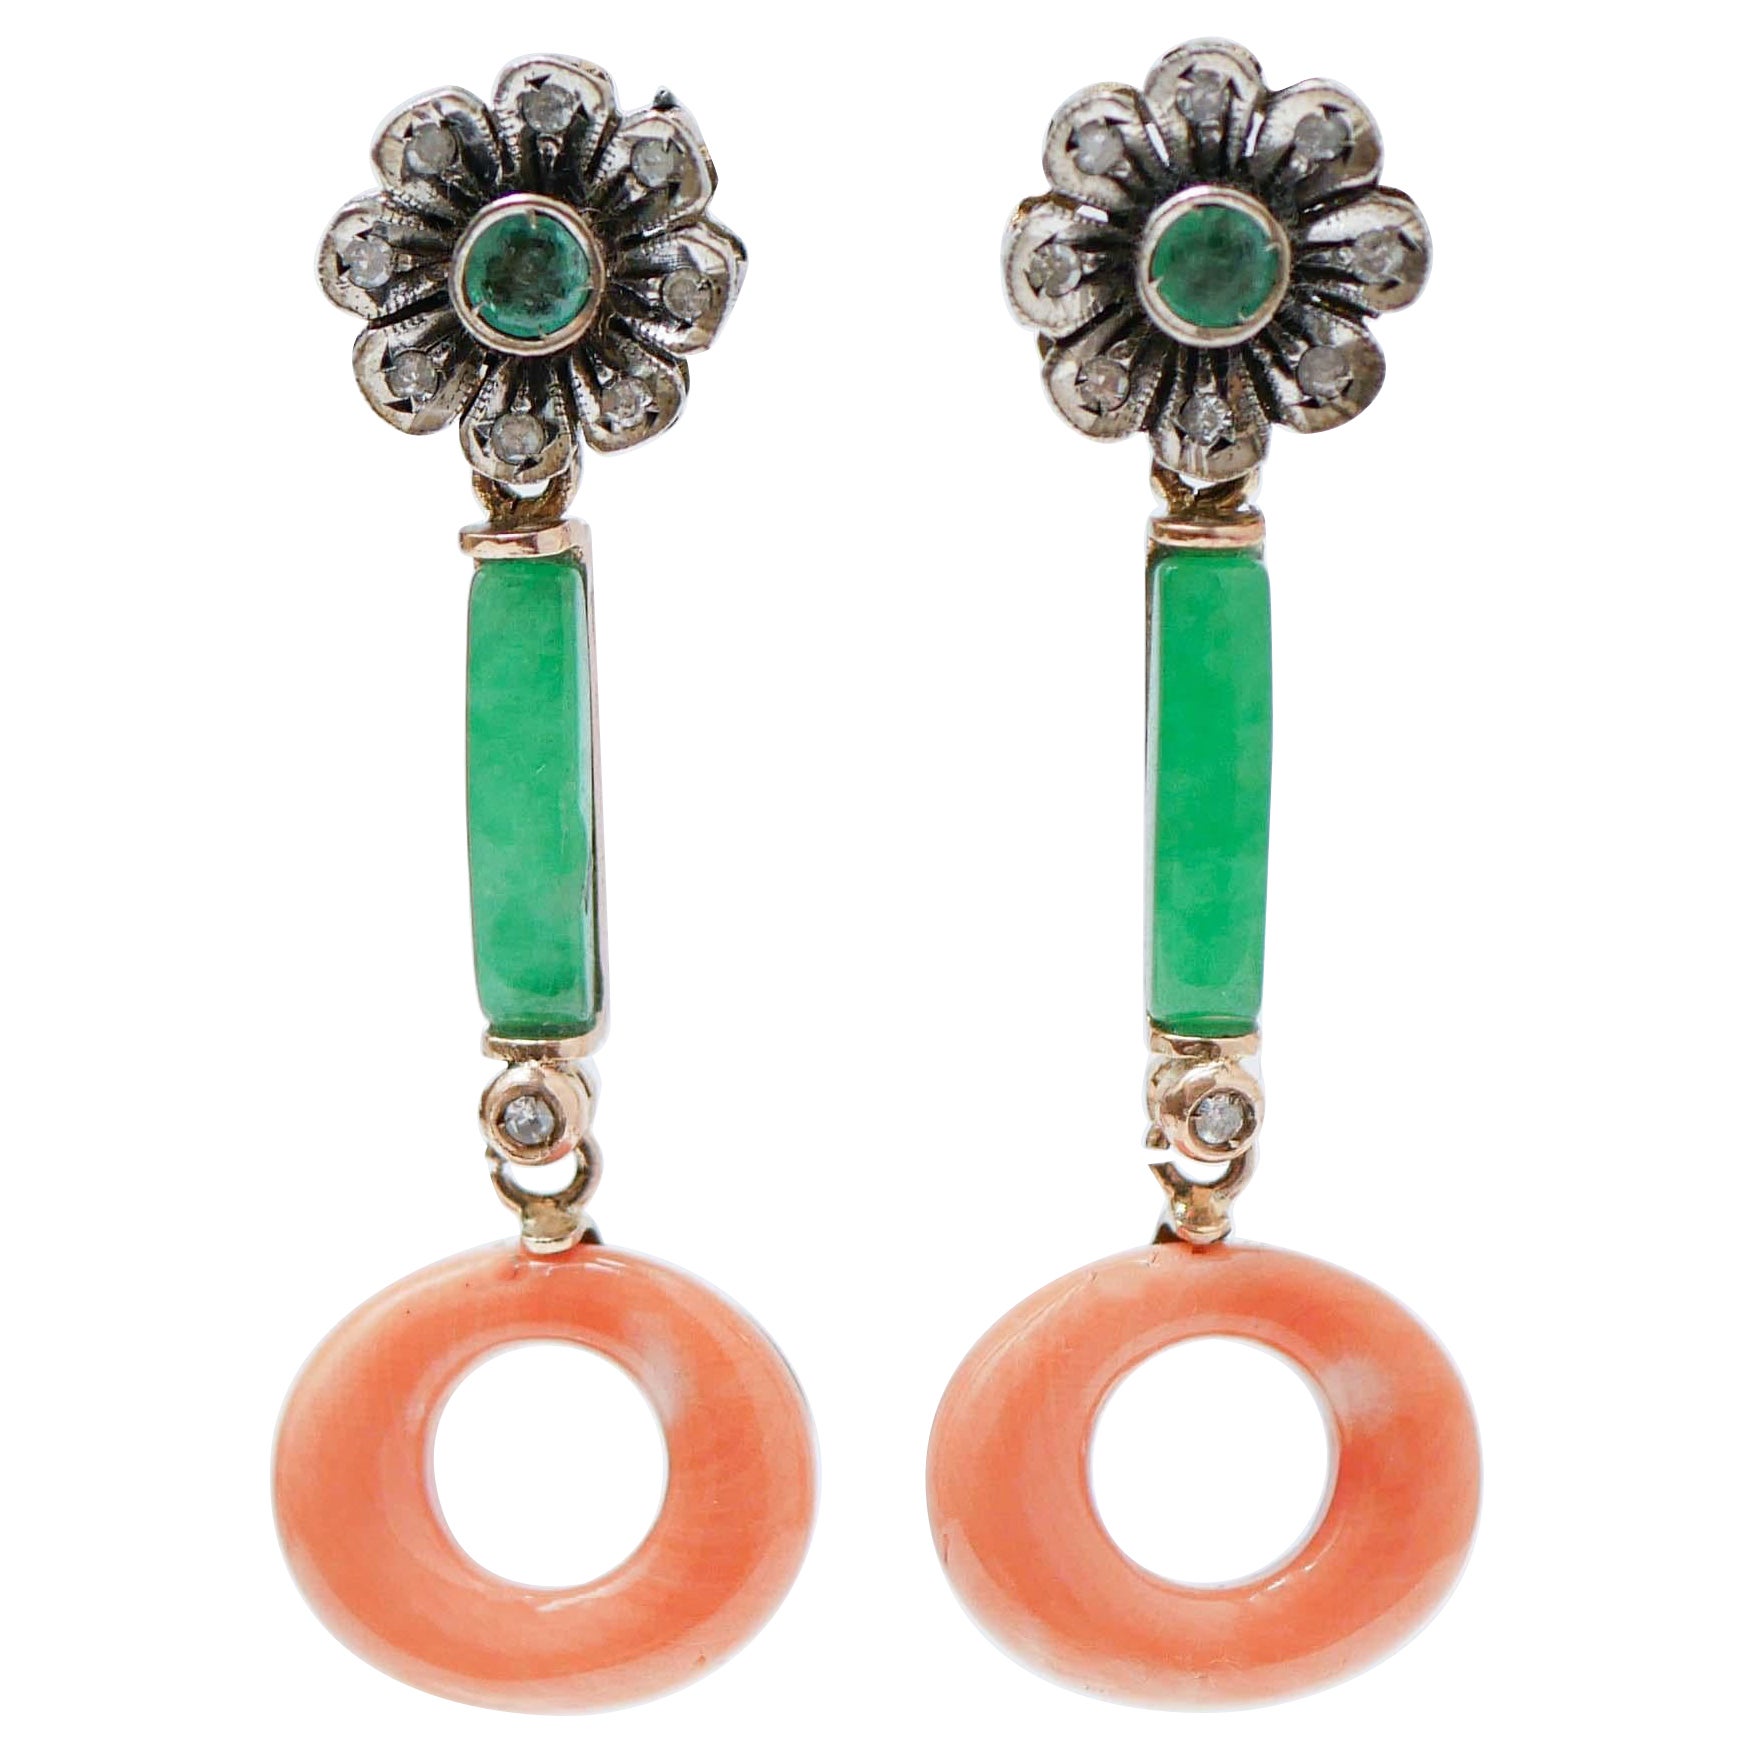 Coral, Diamonds, Emeralds, Jade, Rose Gold and Silver Earrings. For Sale